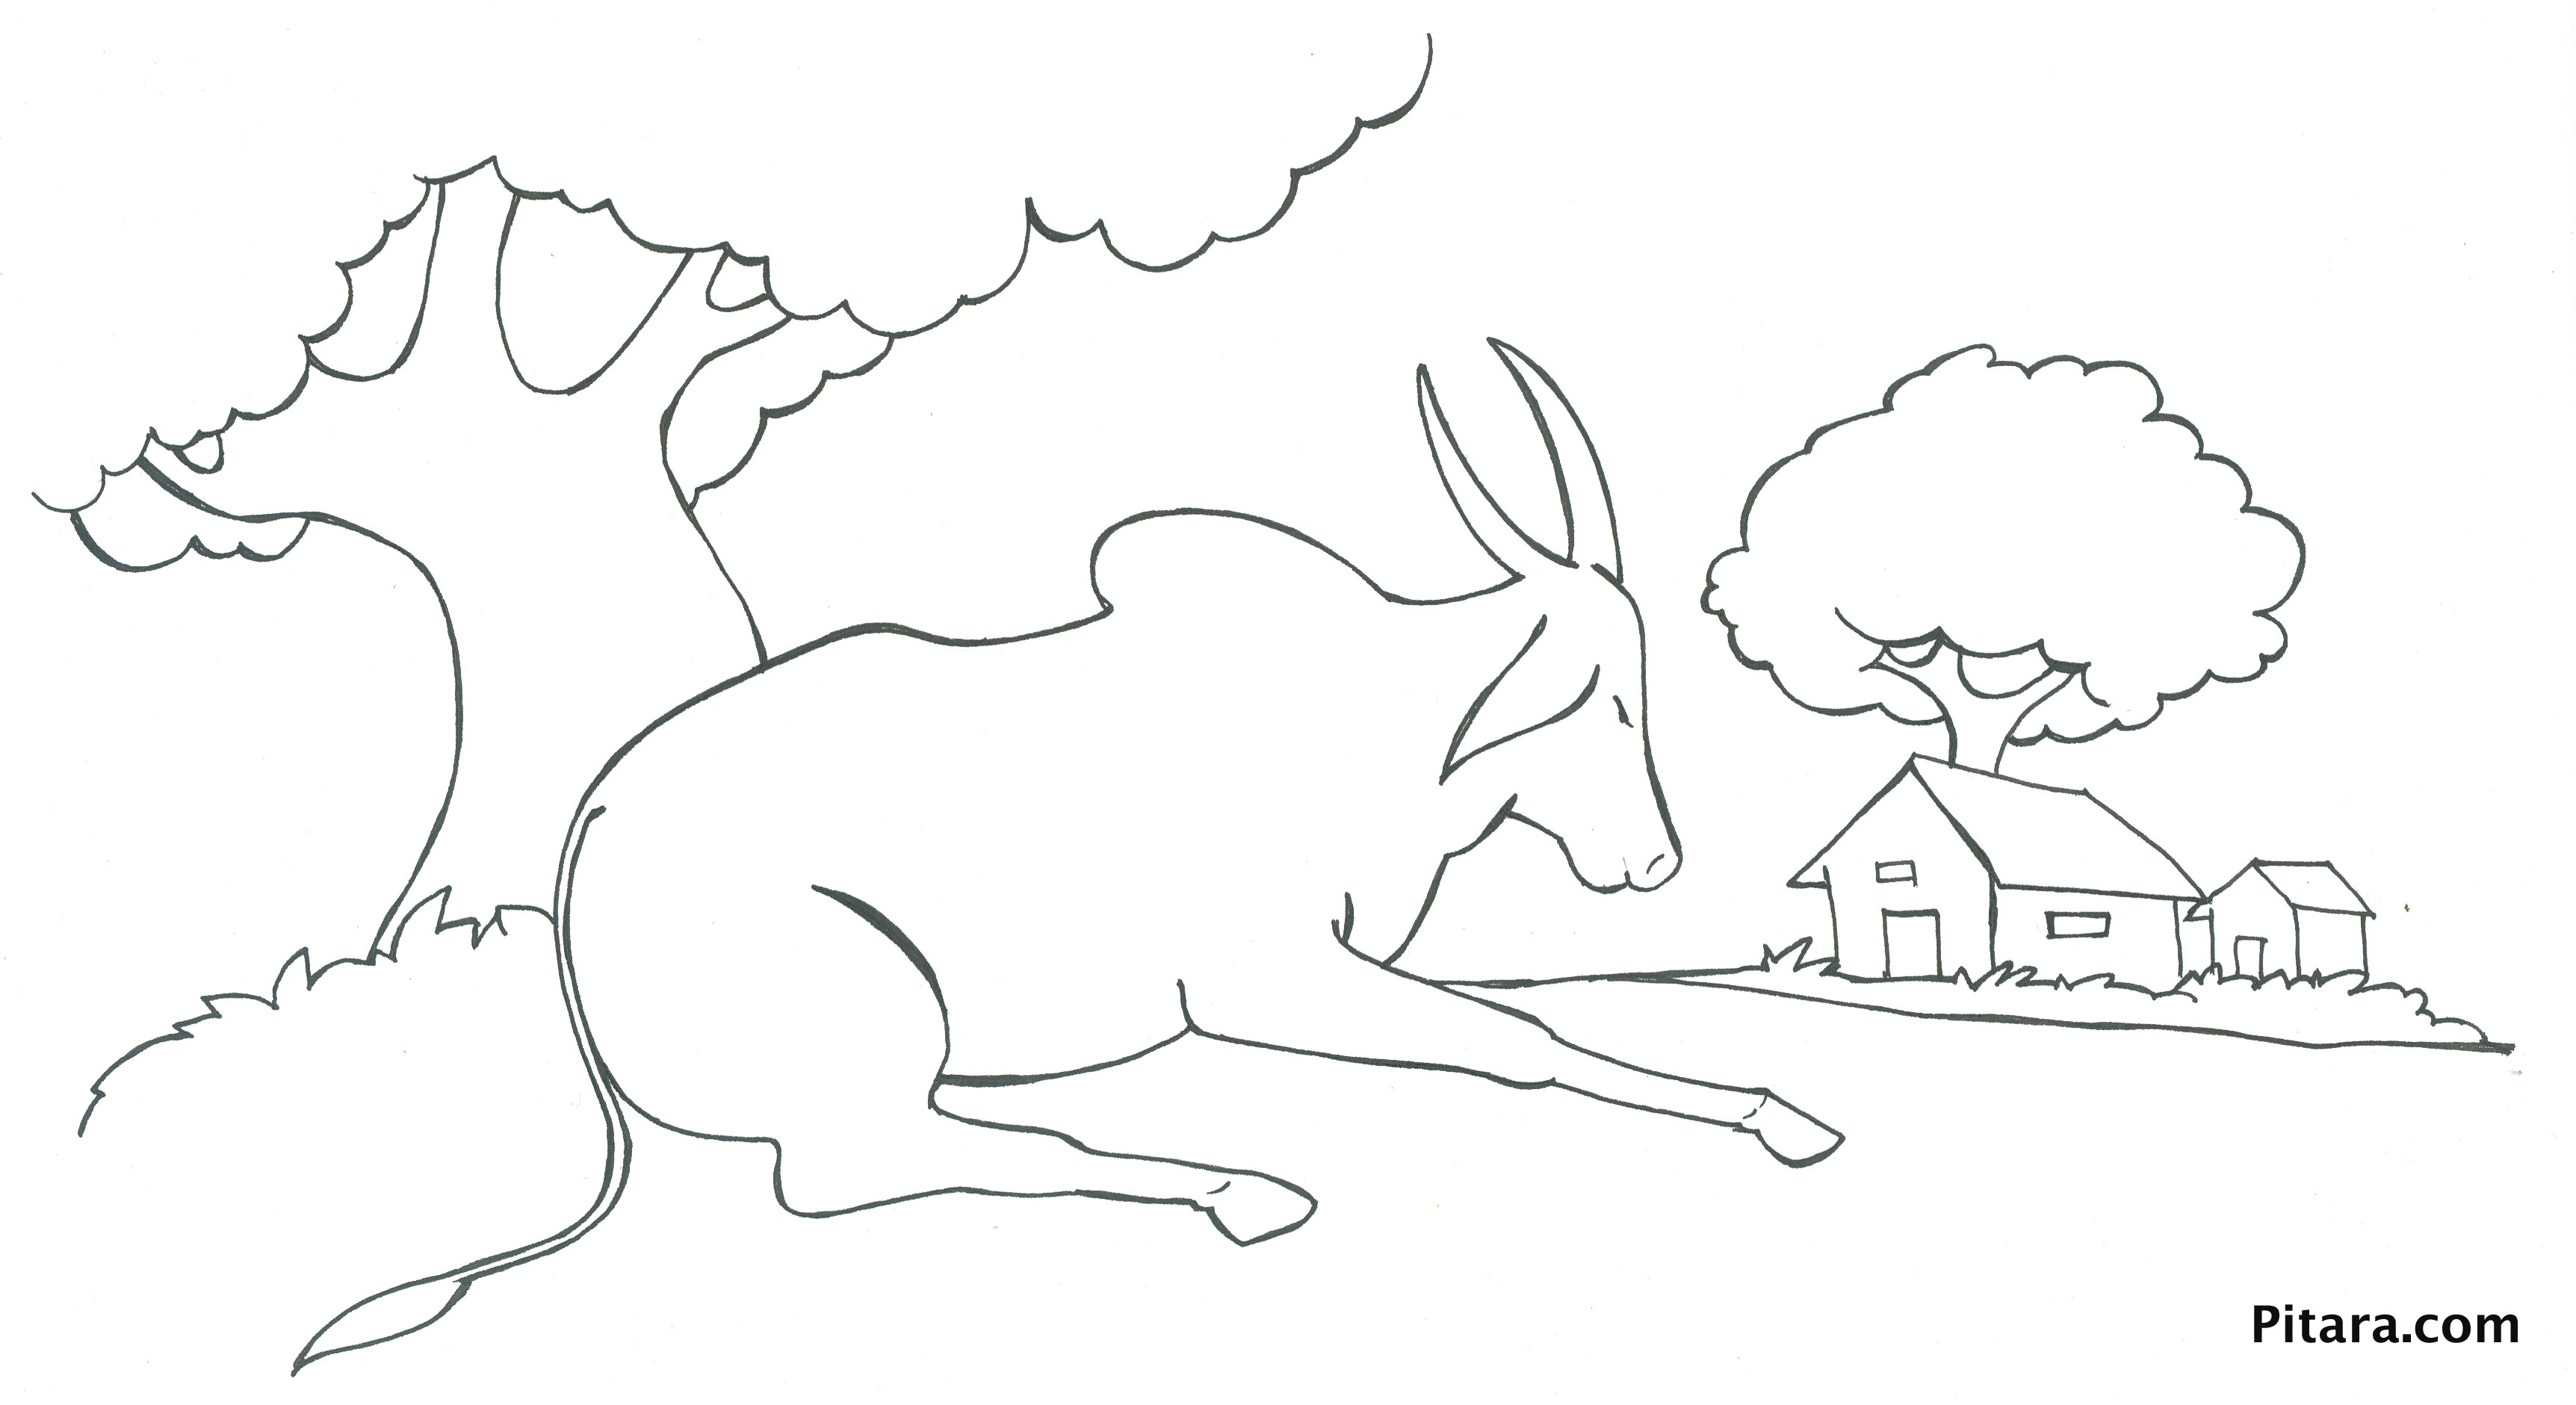 Domestic Animals Coloring Pages | Pitara Kids Network